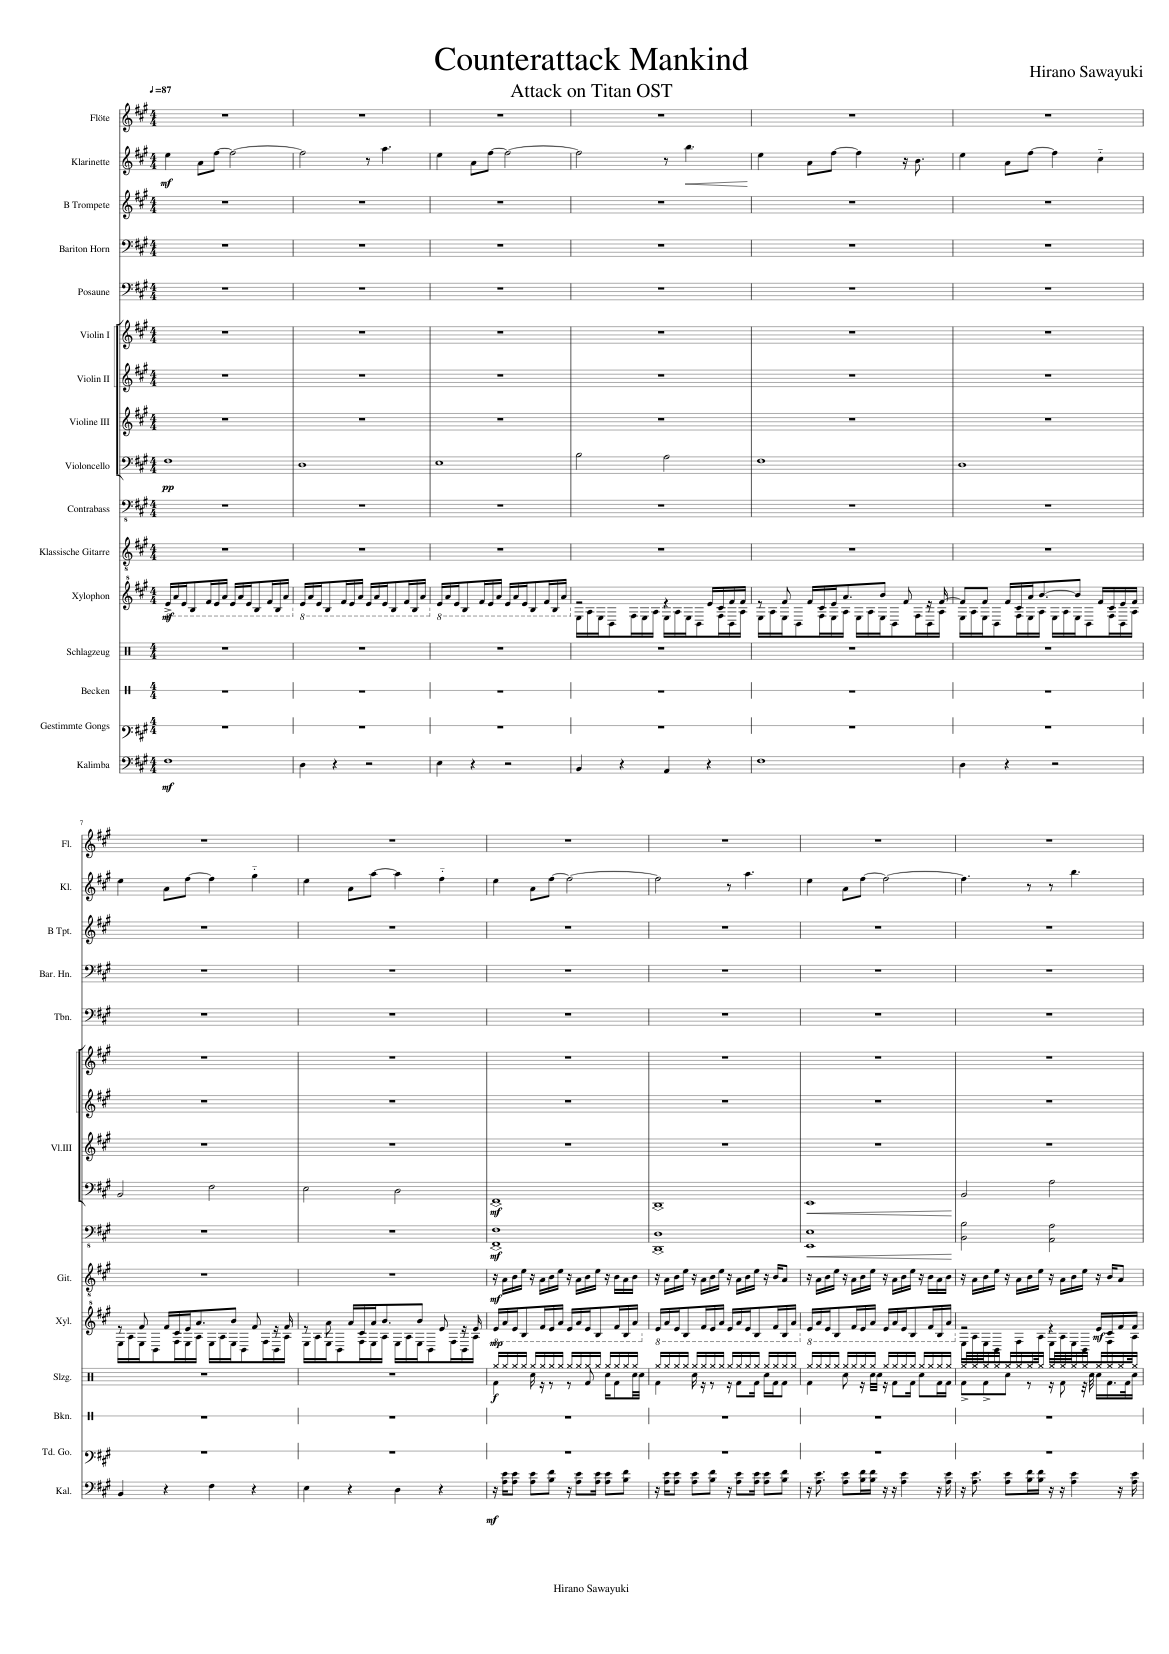 Counterattack Mankind Attack On Titan Ost Sheet Music For Trombone Flute Trumpet In B Flat Contrabass More Instruments Mixed Ensemble Musescore Com